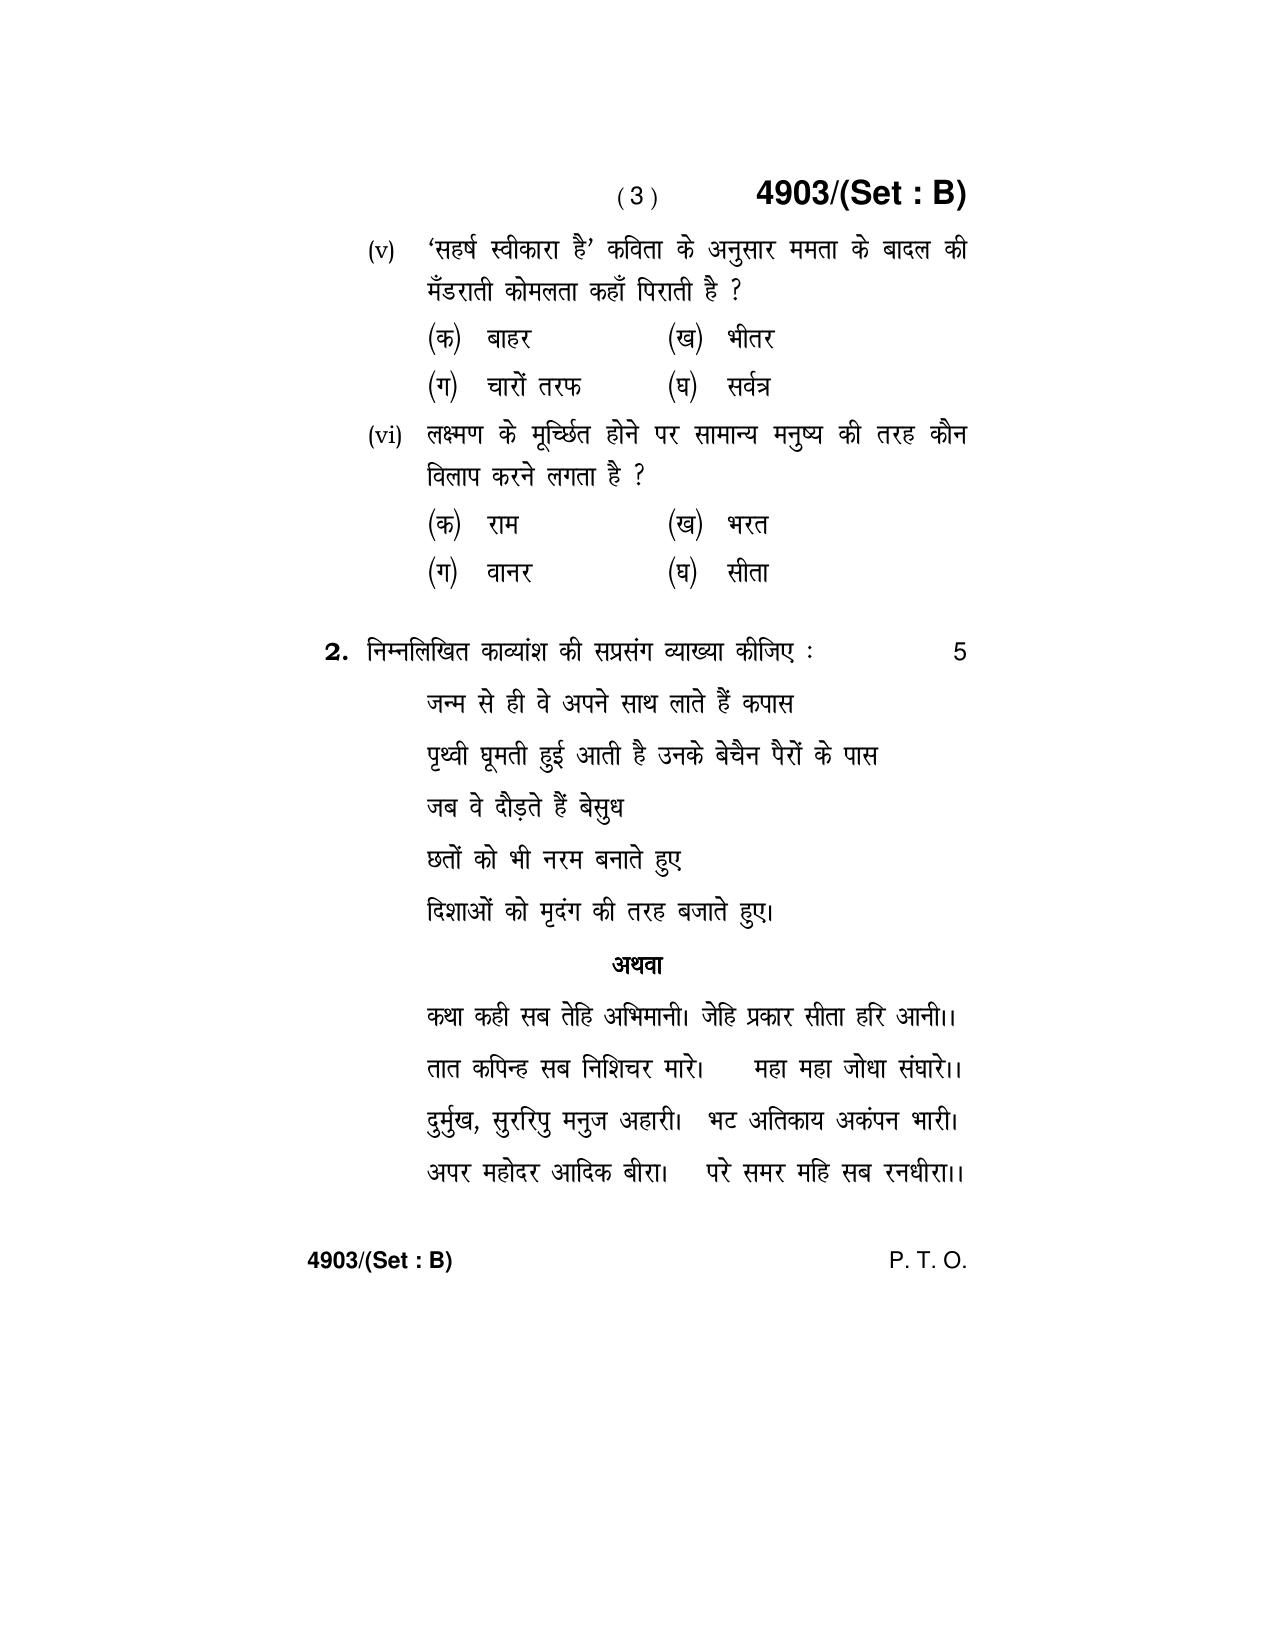 Haryana Board HBSE Class 12 Hindi Core 2020 Question Paper - Page 11